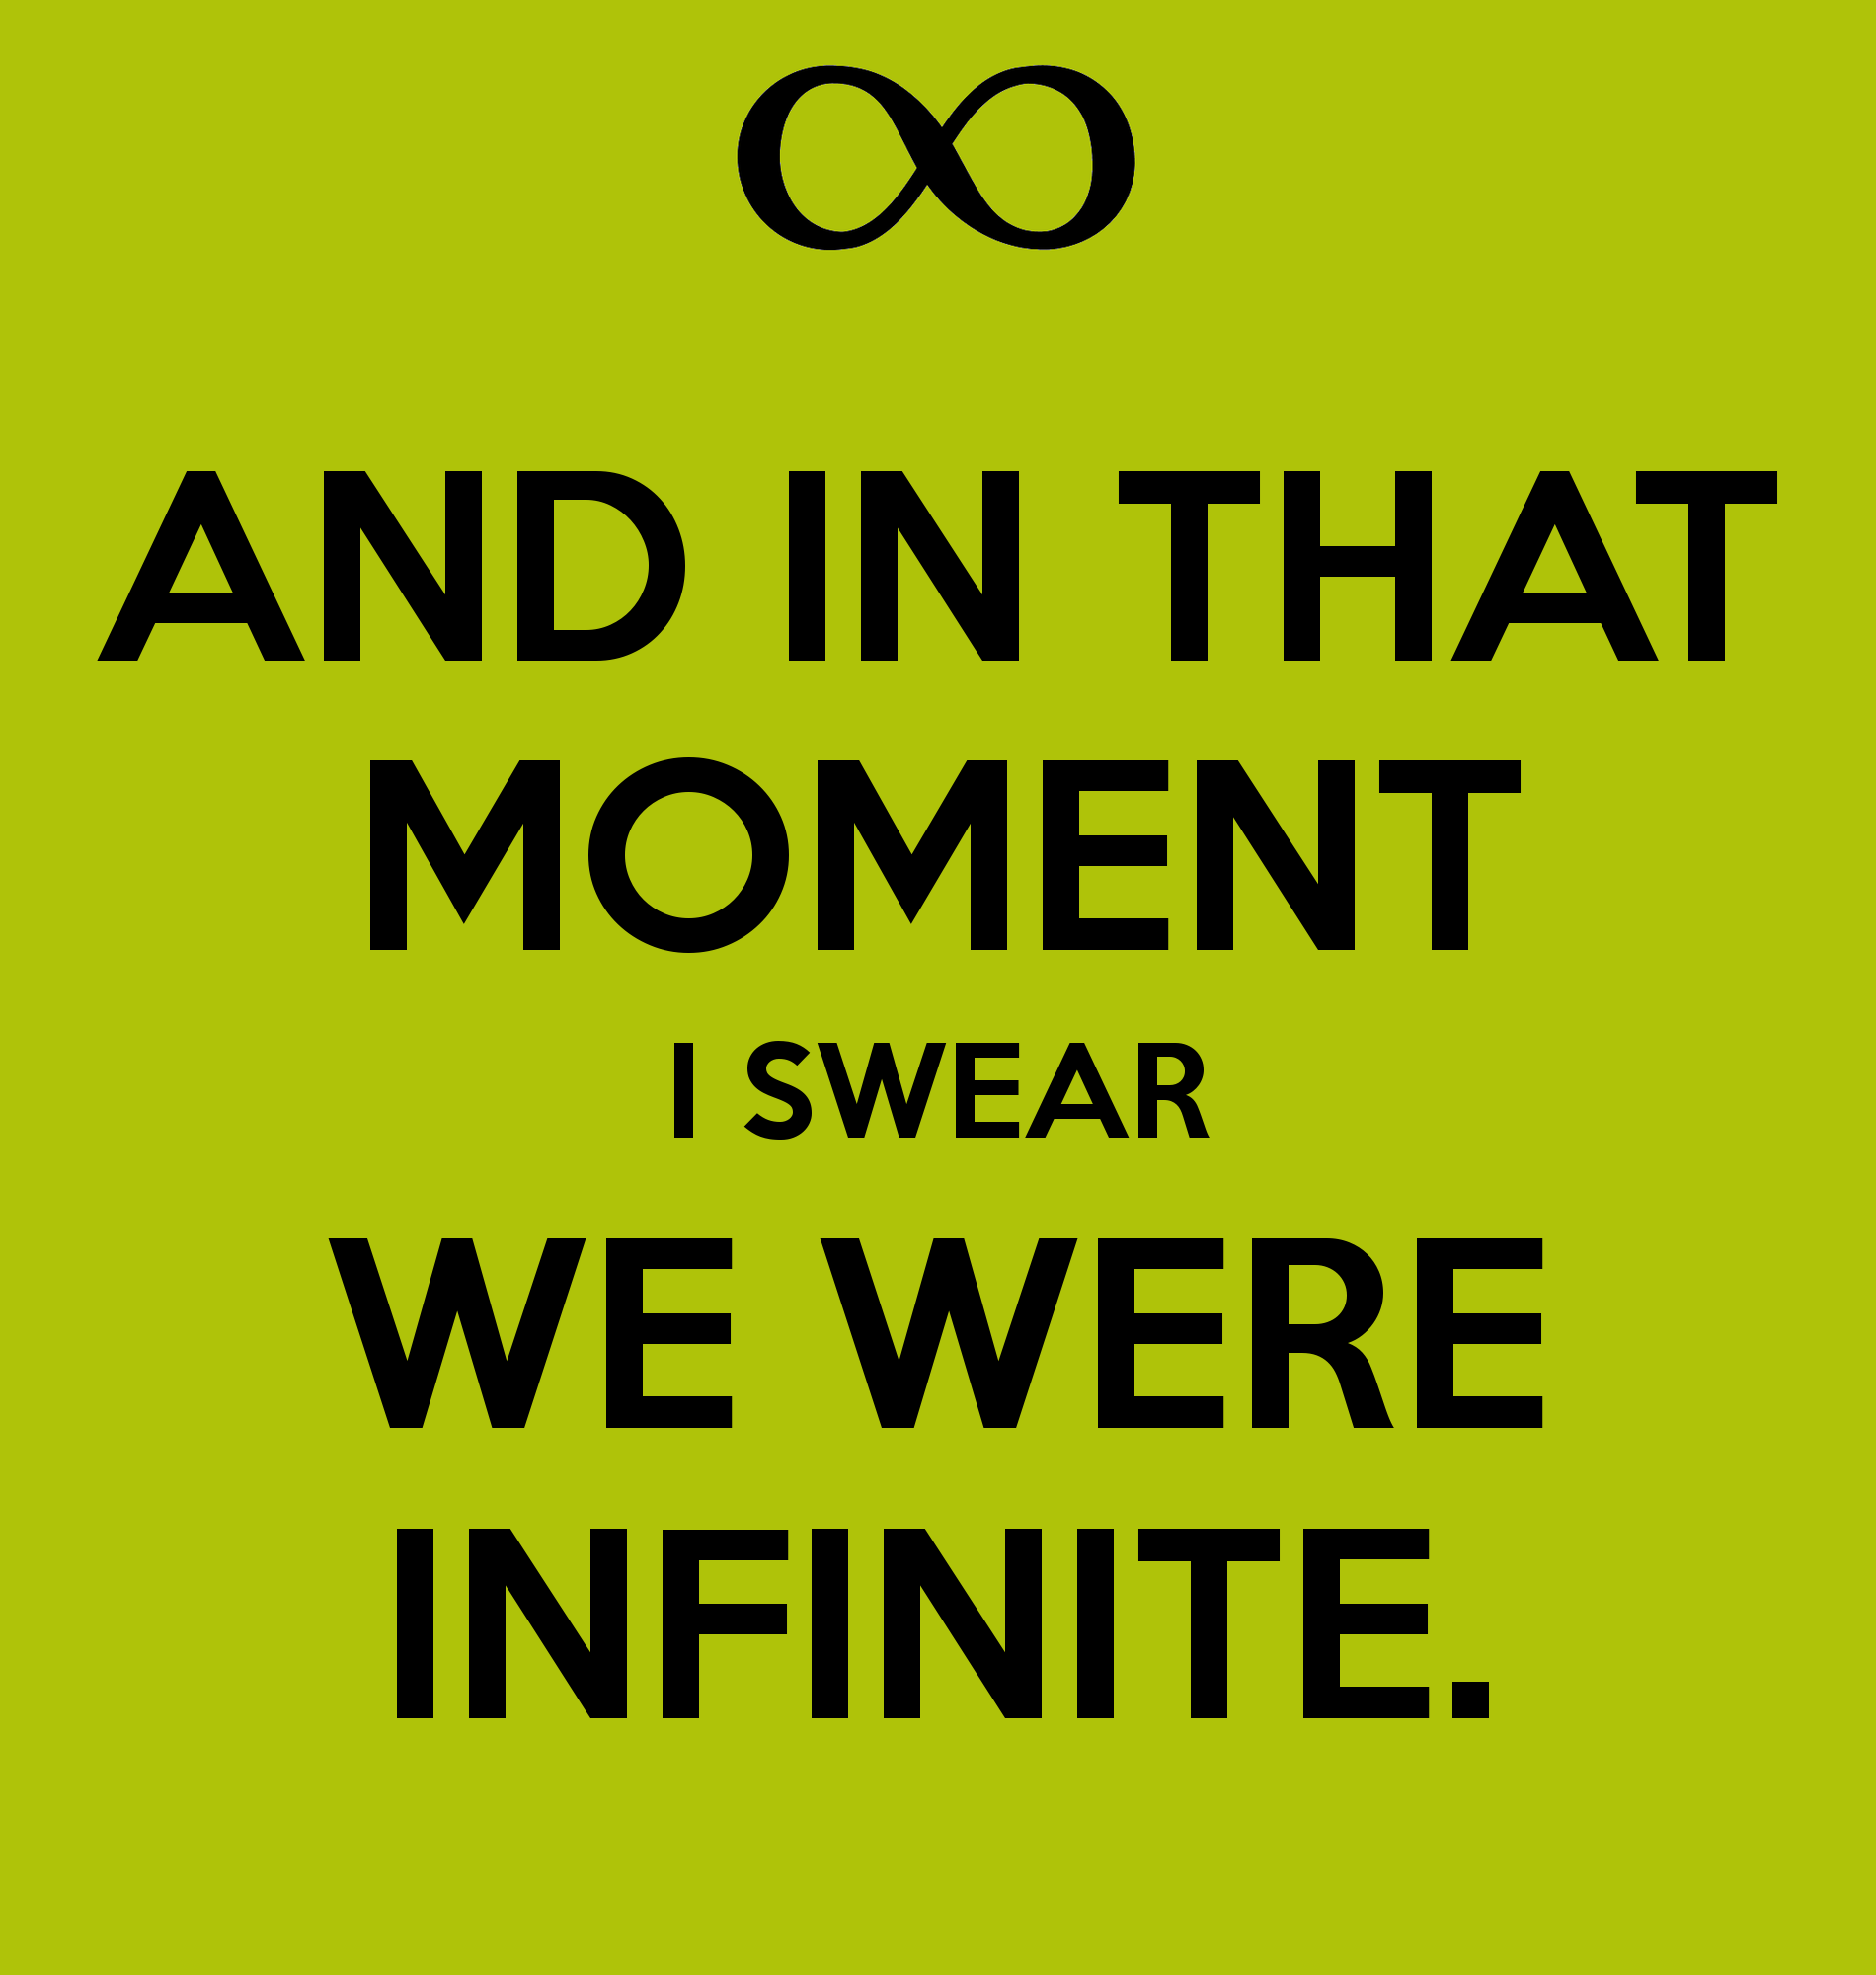 Moment I Swear We Were Infinite Wallpaper Image Pictures Becuo